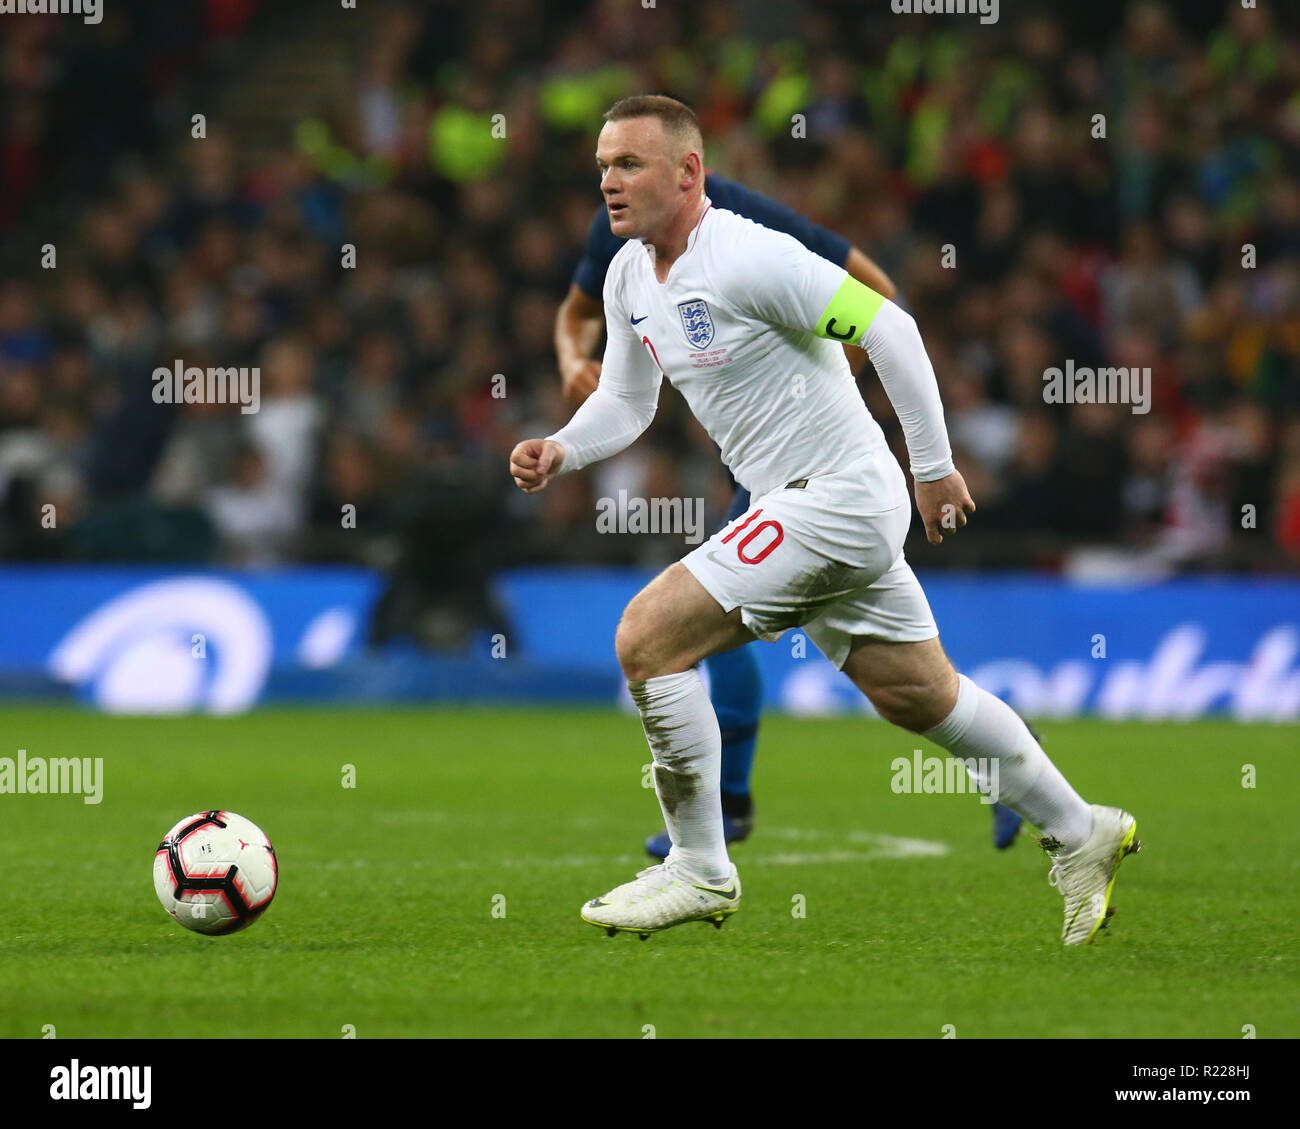 London, UK. 15th November, 2018. Wayne Rooney of England  during the friendly soccer match between England and USA at the Wembley Stadium in London, England, on 15 November 2018.  Credit Action Foto Sport Credit: Action Foto Sport/Alamy Live News Stock Photo